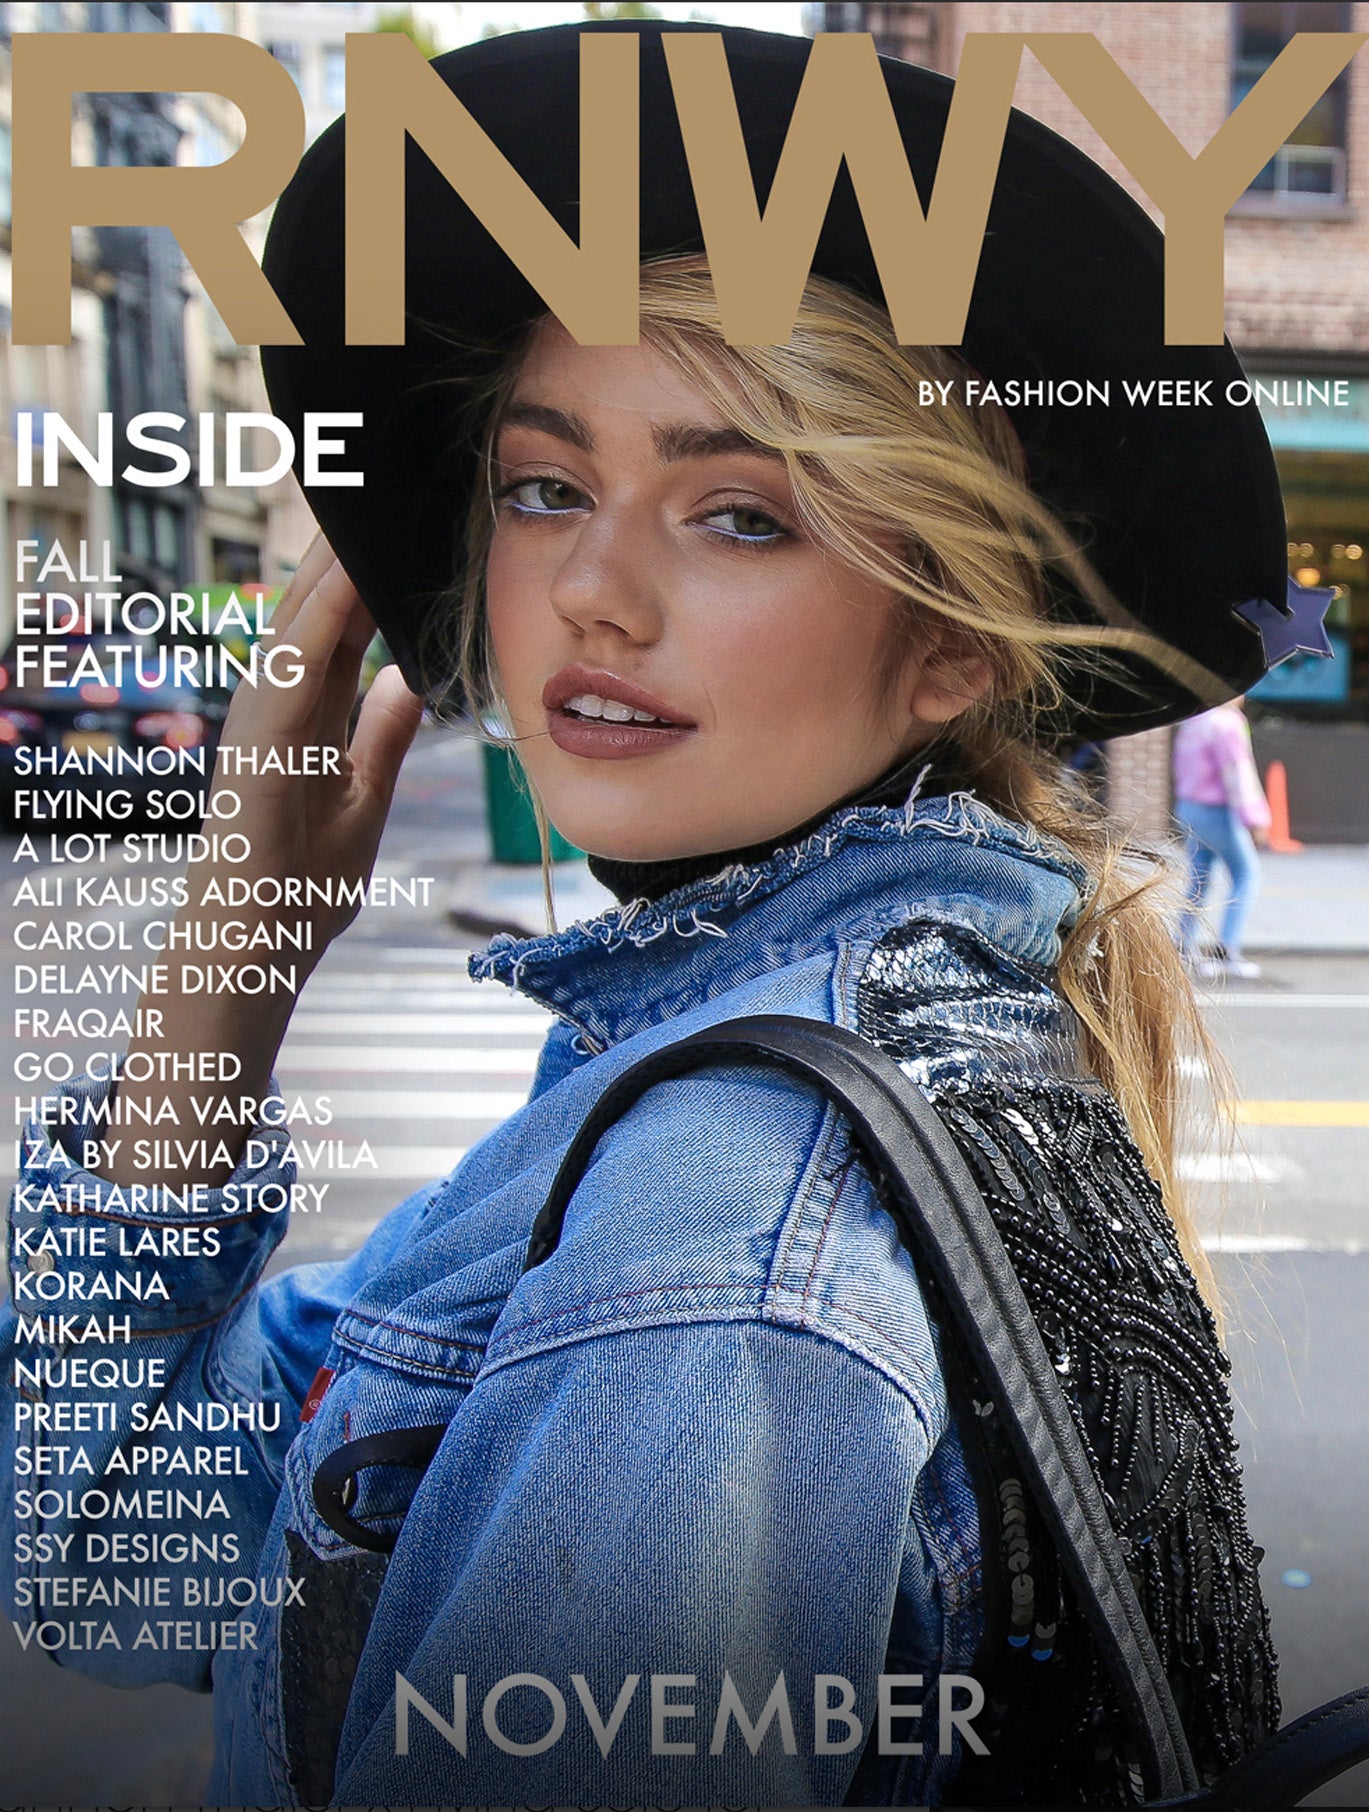 Mikah on the cover of RNWY Fashion Week Online November issue